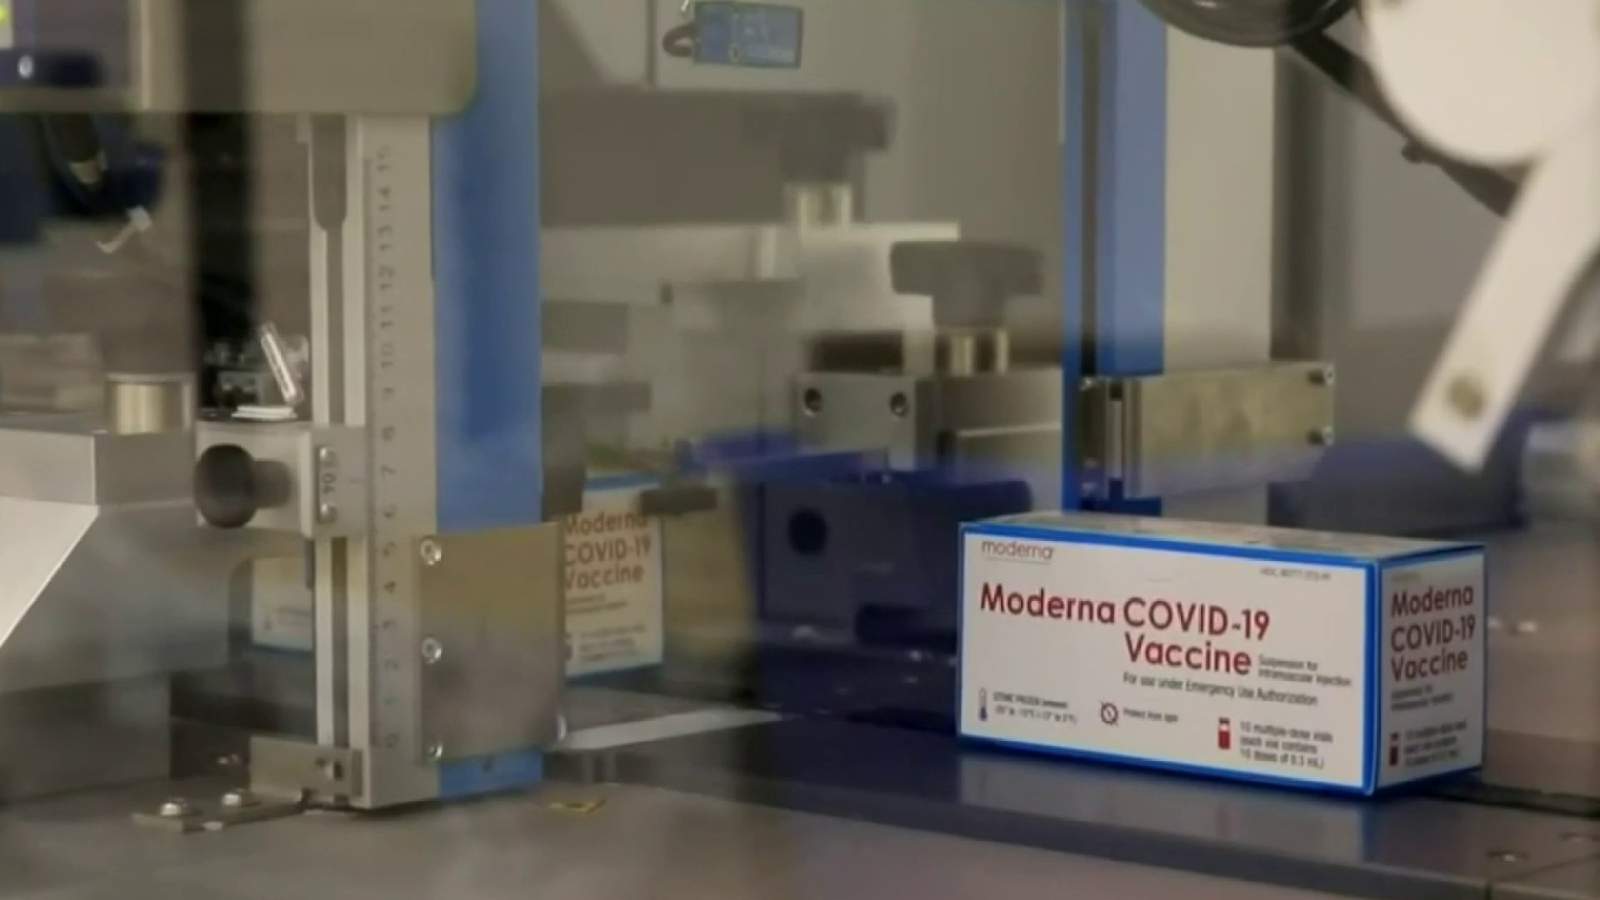 Nearly 12K doses of Modern COVID-19 vaccine destroyed on the way to Michigan, state officials say